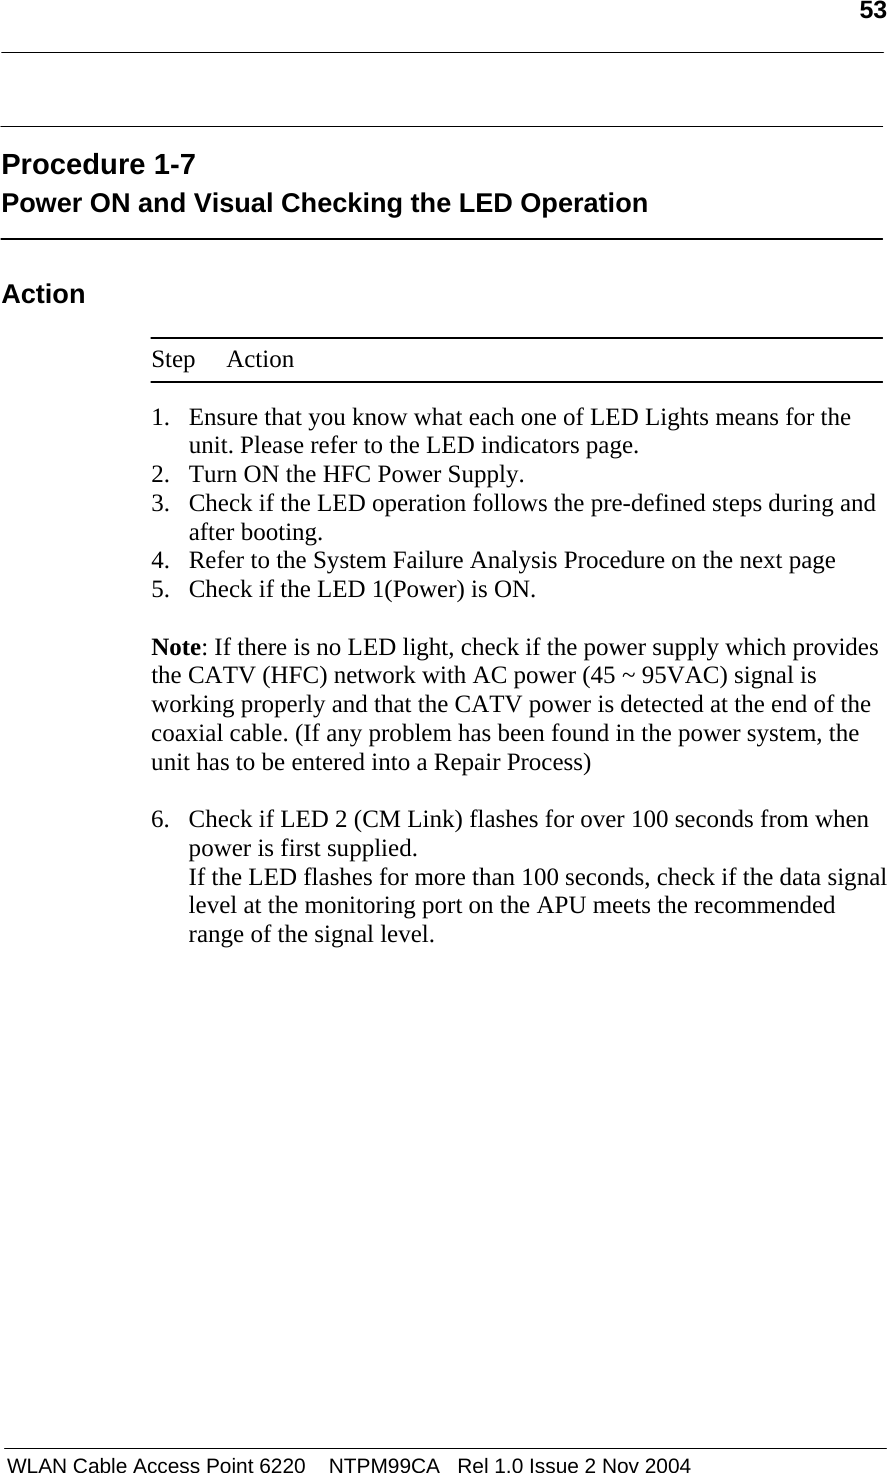   53   WLAN Cable Access Point 6220    NTPM99CA   Rel 1.0 Issue 2 Nov 2004  Procedure 1-7 Power ON and Visual Checking the LED Operation  Action  Step Action  1. Ensure that you know what each one of LED Lights means for the unit. Please refer to the LED indicators page.  2. Turn ON the HFC Power Supply.  3. Check if the LED operation follows the pre-defined steps during and after booting. 4. Refer to the System Failure Analysis Procedure on the next page 5. Check if the LED 1(Power) is ON.   Note: If there is no LED light, check if the power supply which provides the CATV (HFC) network with AC power (45 ~ 95VAC) signal is working properly and that the CATV power is detected at the end of the coaxial cable. (If any problem has been found in the power system, the unit has to be entered into a Repair Process)  6. Check if LED 2 (CM Link) flashes for over 100 seconds from when power is first supplied. If the LED flashes for more than 100 seconds, check if the data signal level at the monitoring port on the APU meets the recommended range of the signal level.  